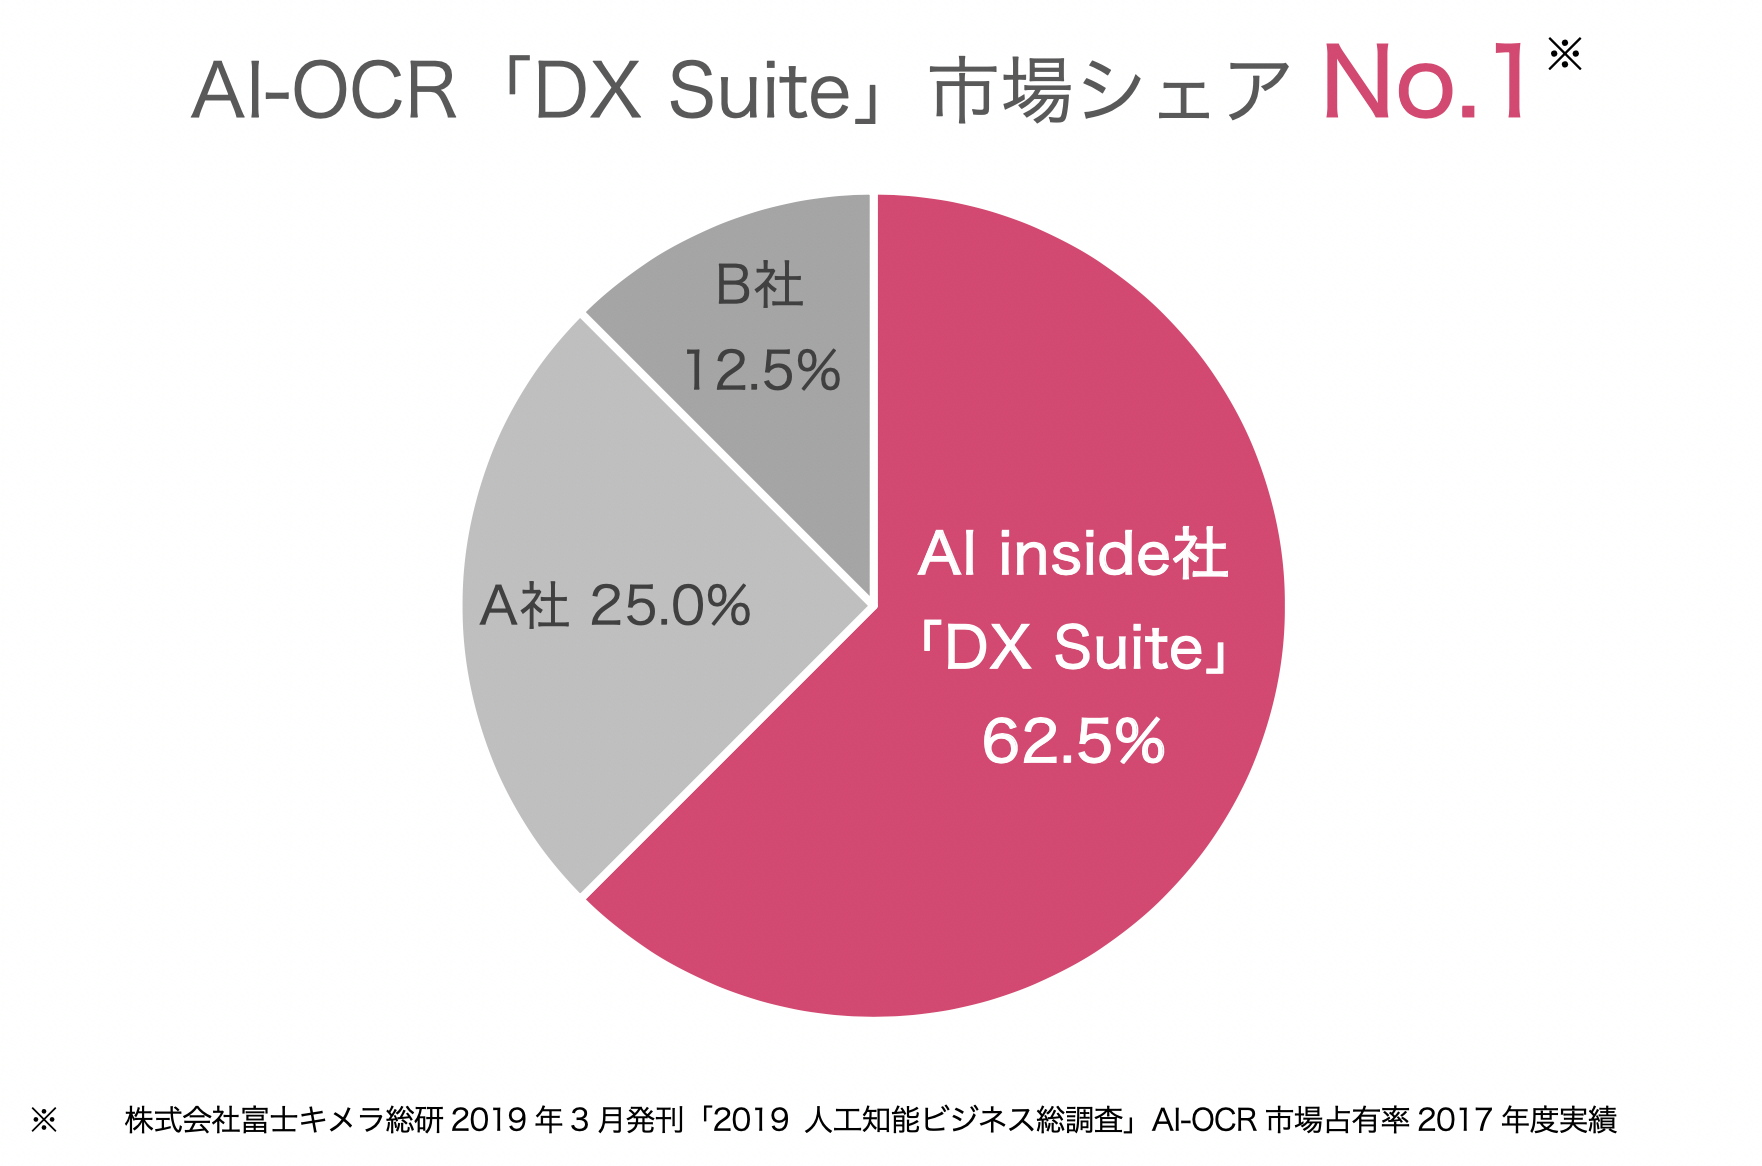 DX Suite がAI-OCR市場シェアNo.1を獲得